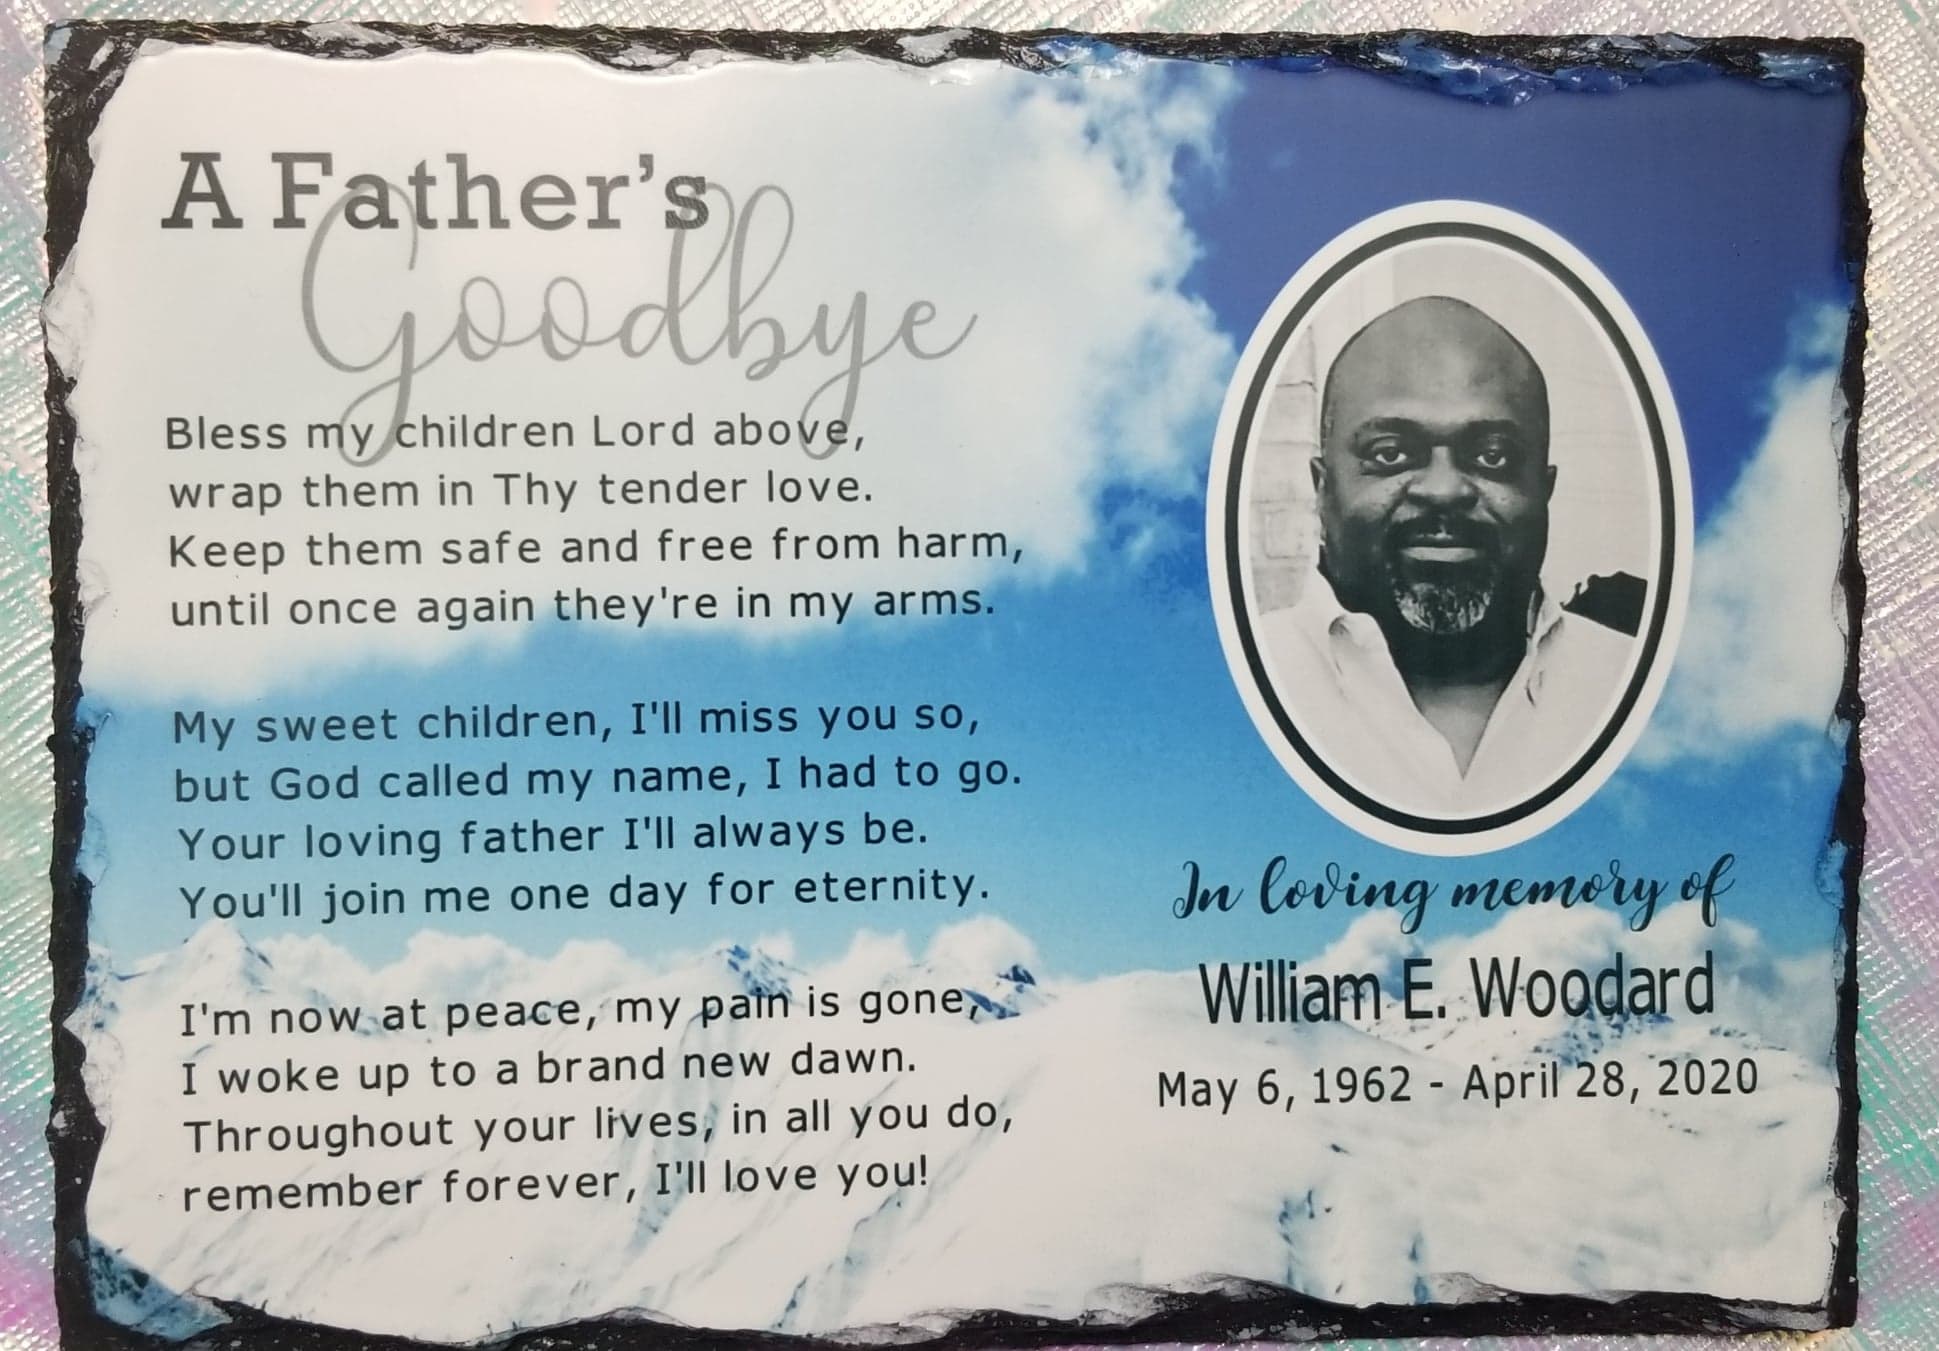 A Father' s Prayer made with sublimation printing